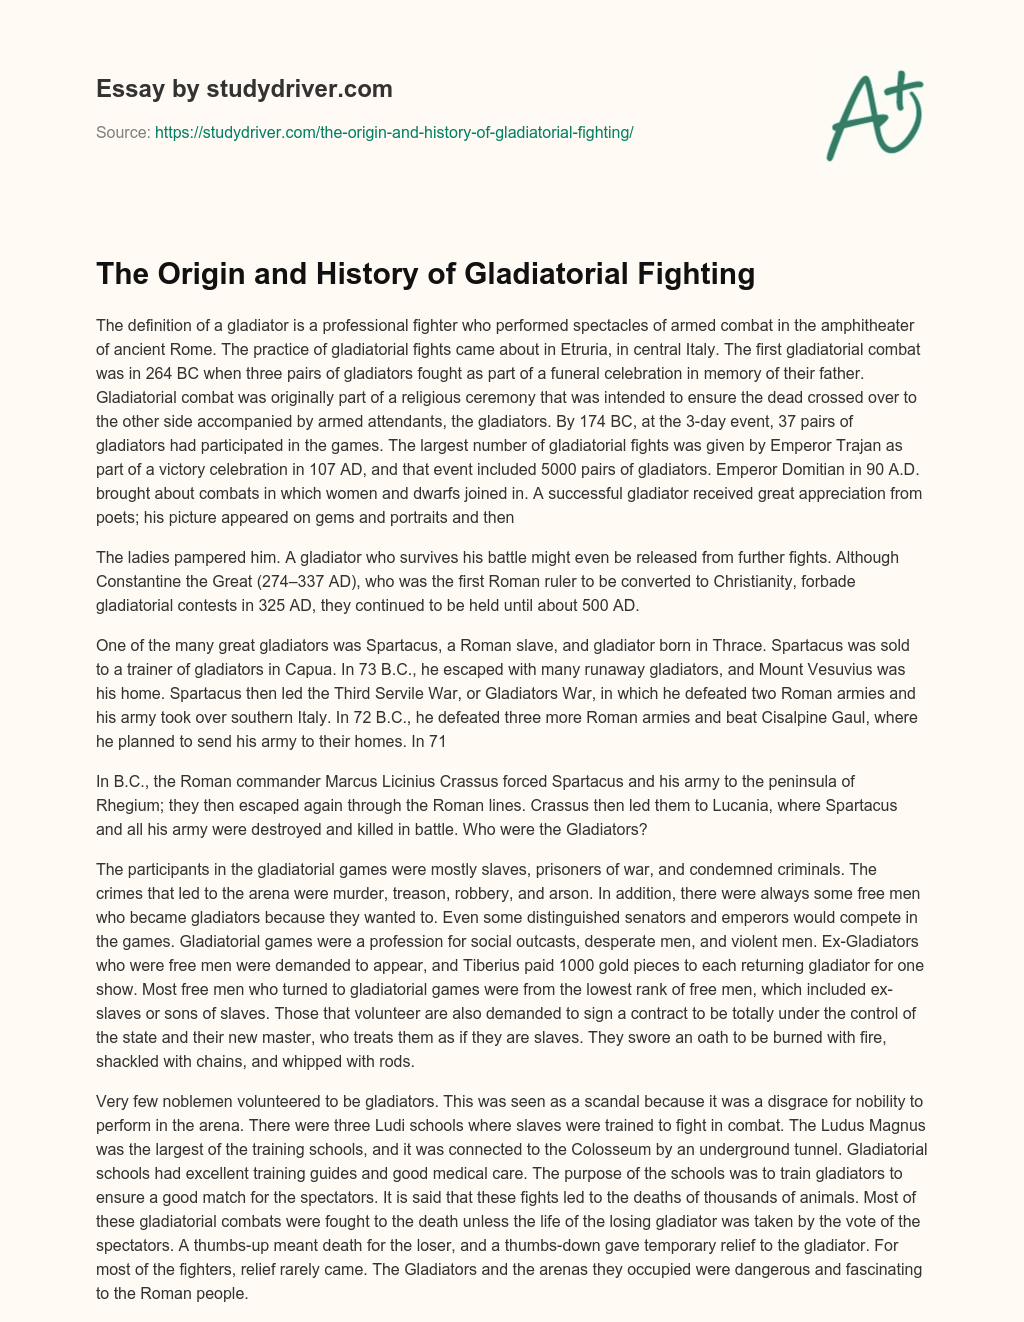 The Origin and History of Gladiatorial Fighting essay